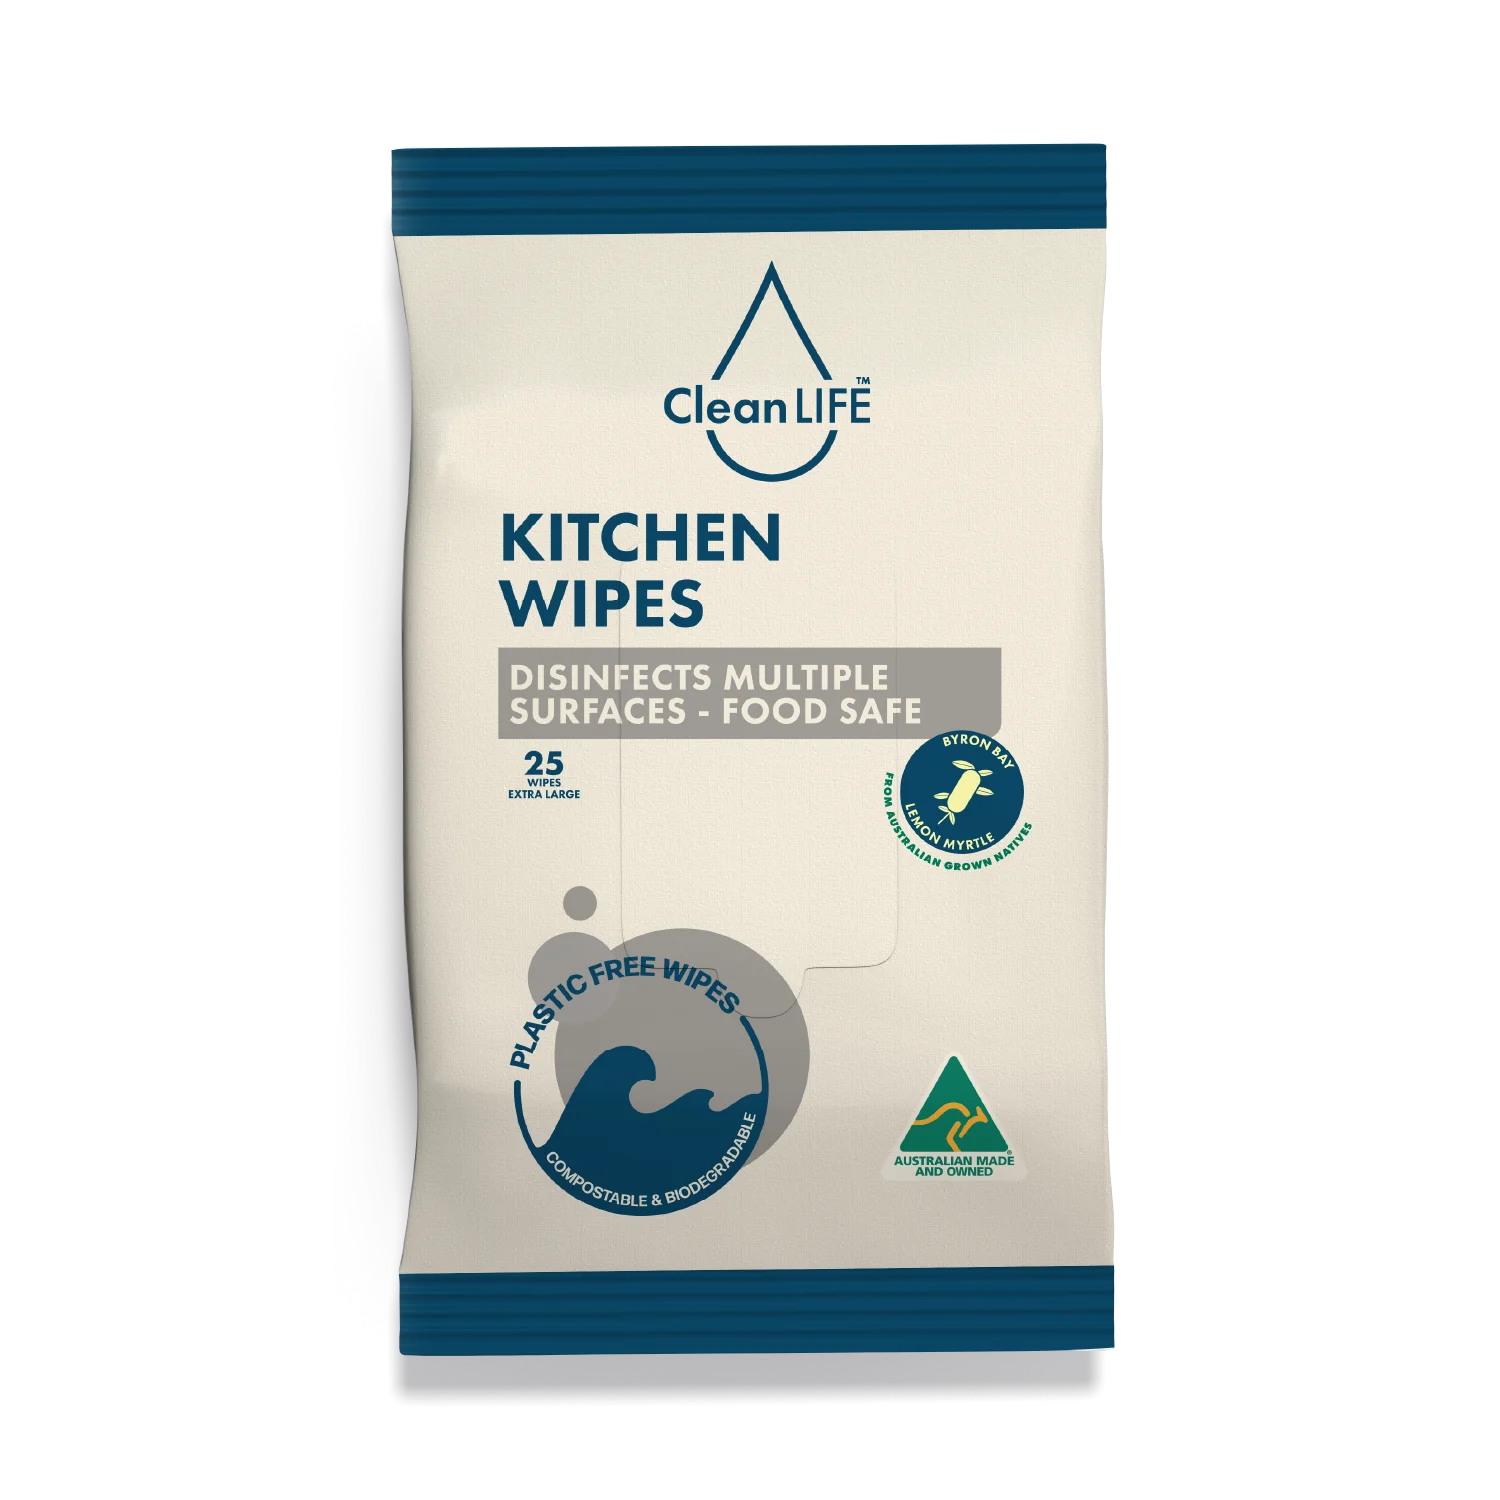 Kitchen wipes - CleanLIFE